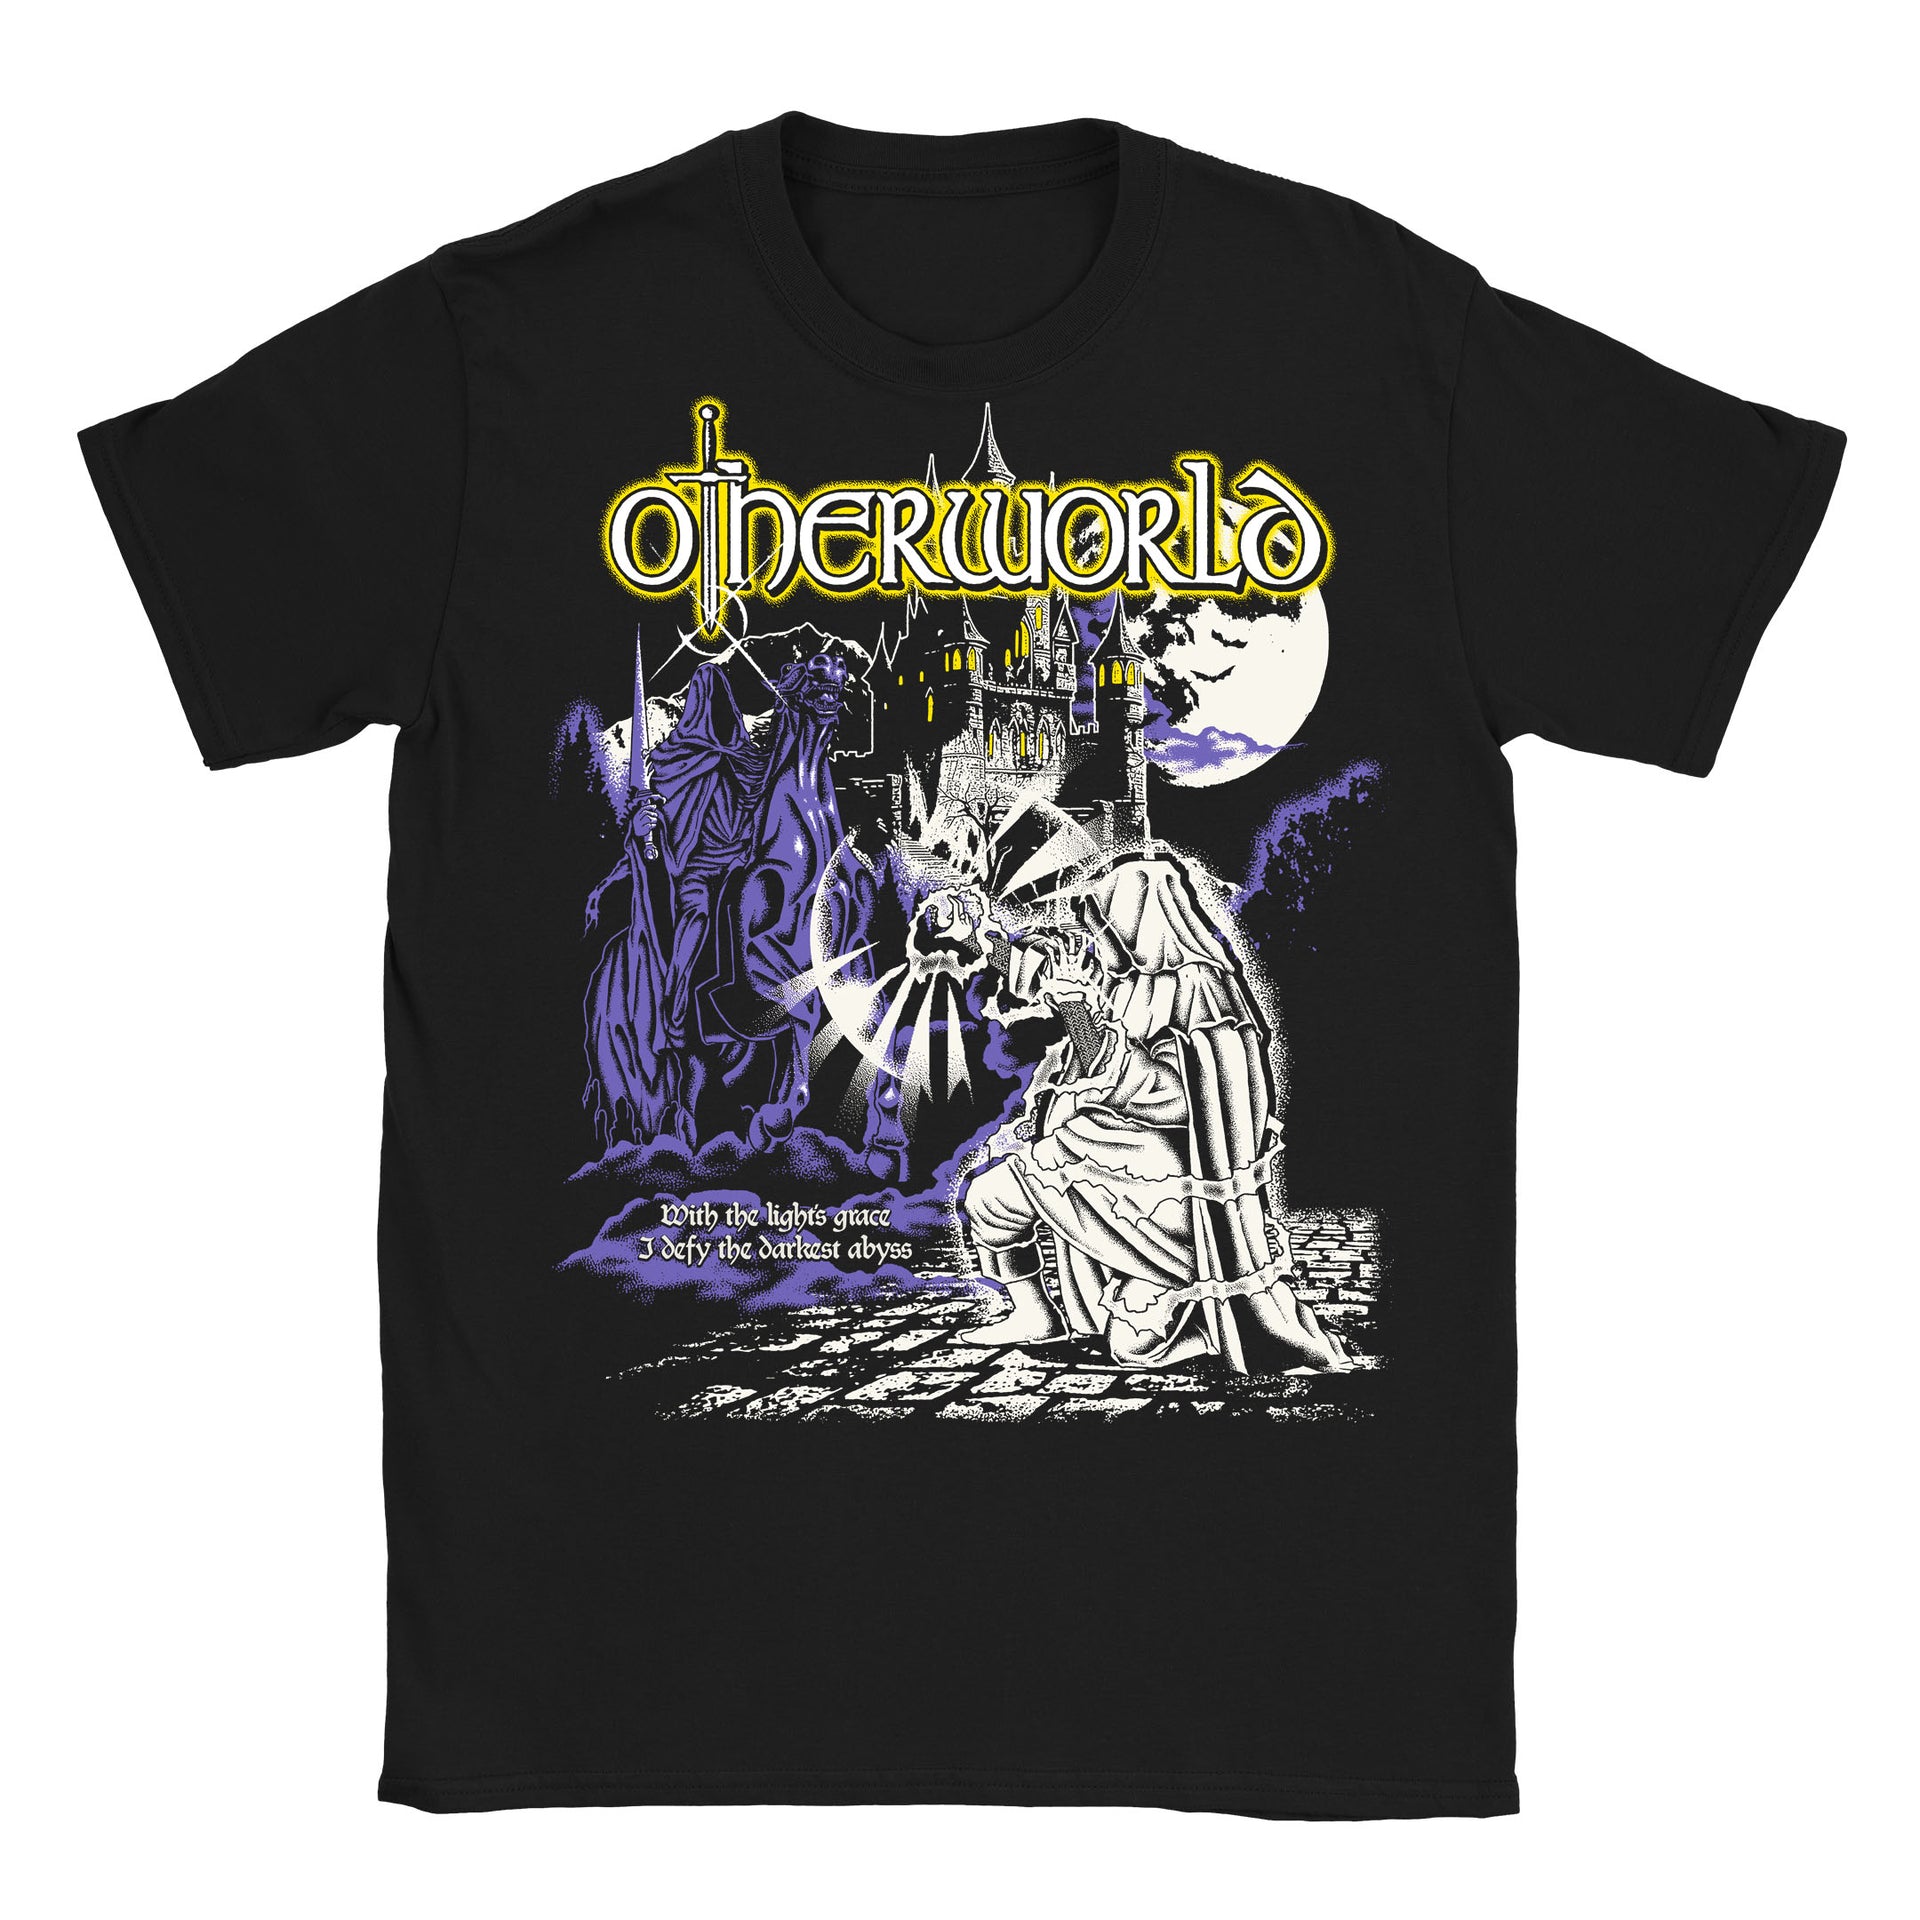 Otherworld With The Light's Grace Shirt